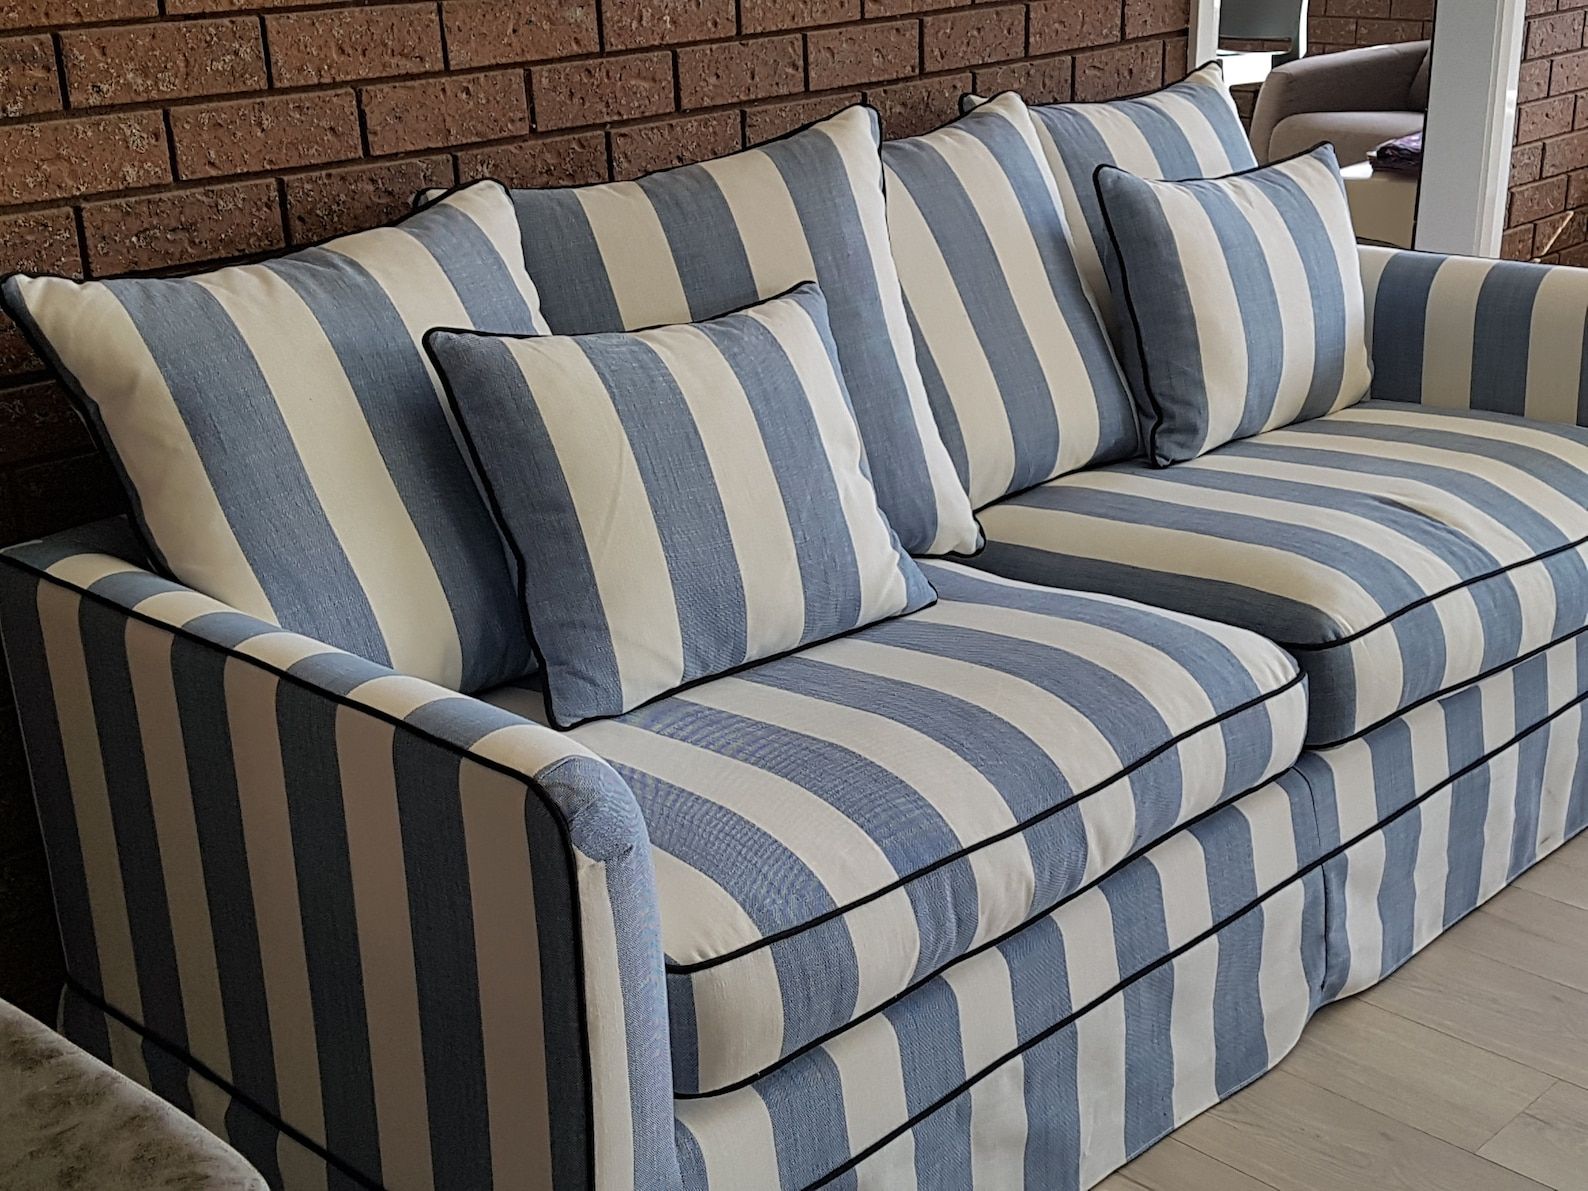 Custom Hamptons Striped Sofa/3 Seater Lounge Blue Denim White – Etsy Pertaining To Sofas In Pattern (View 16 of 20)